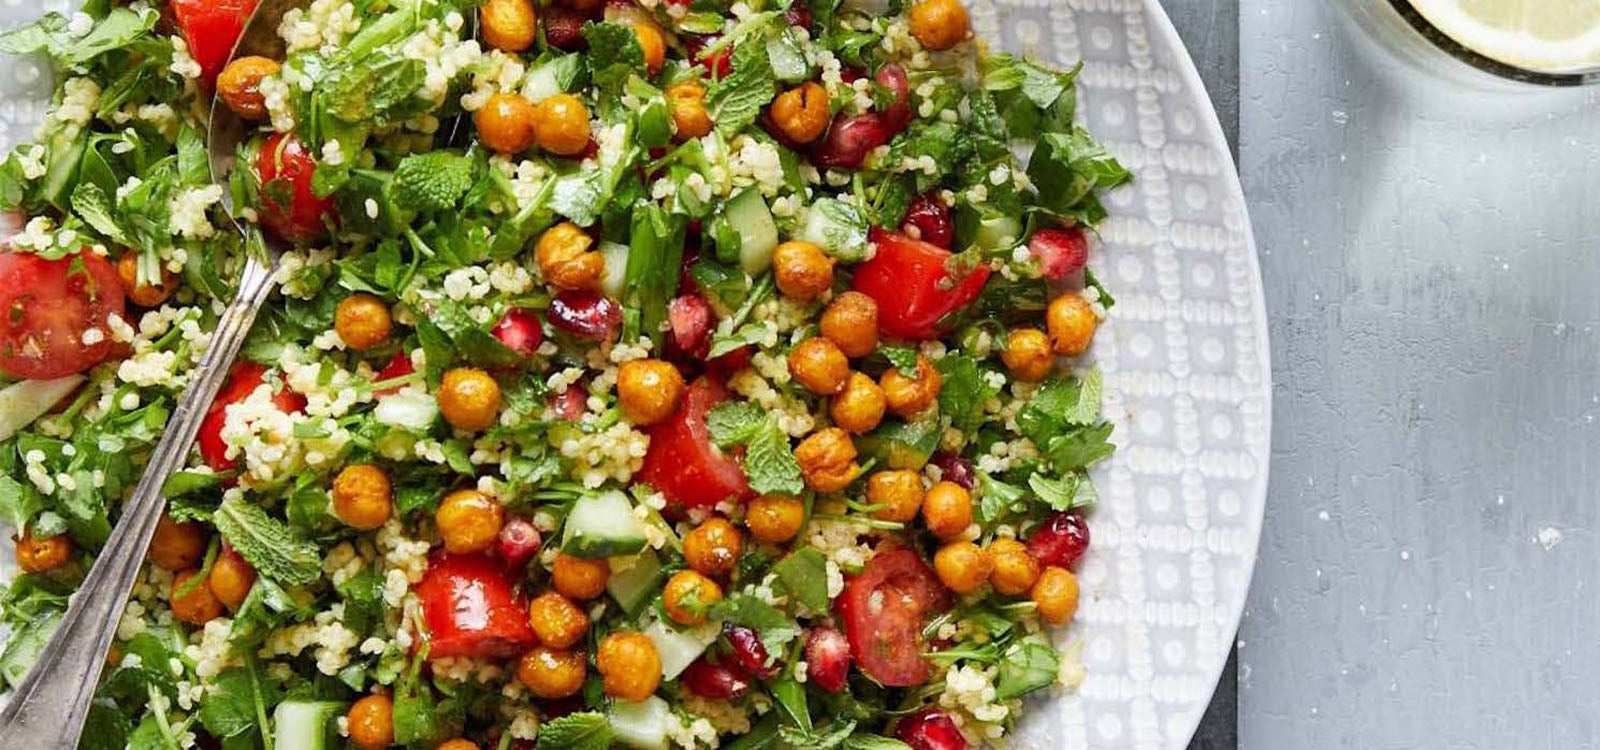 Recipe: MILLET TABBOULEH SALAD WITH ROASTED CHICKPEAS  AND POMEGRANATE